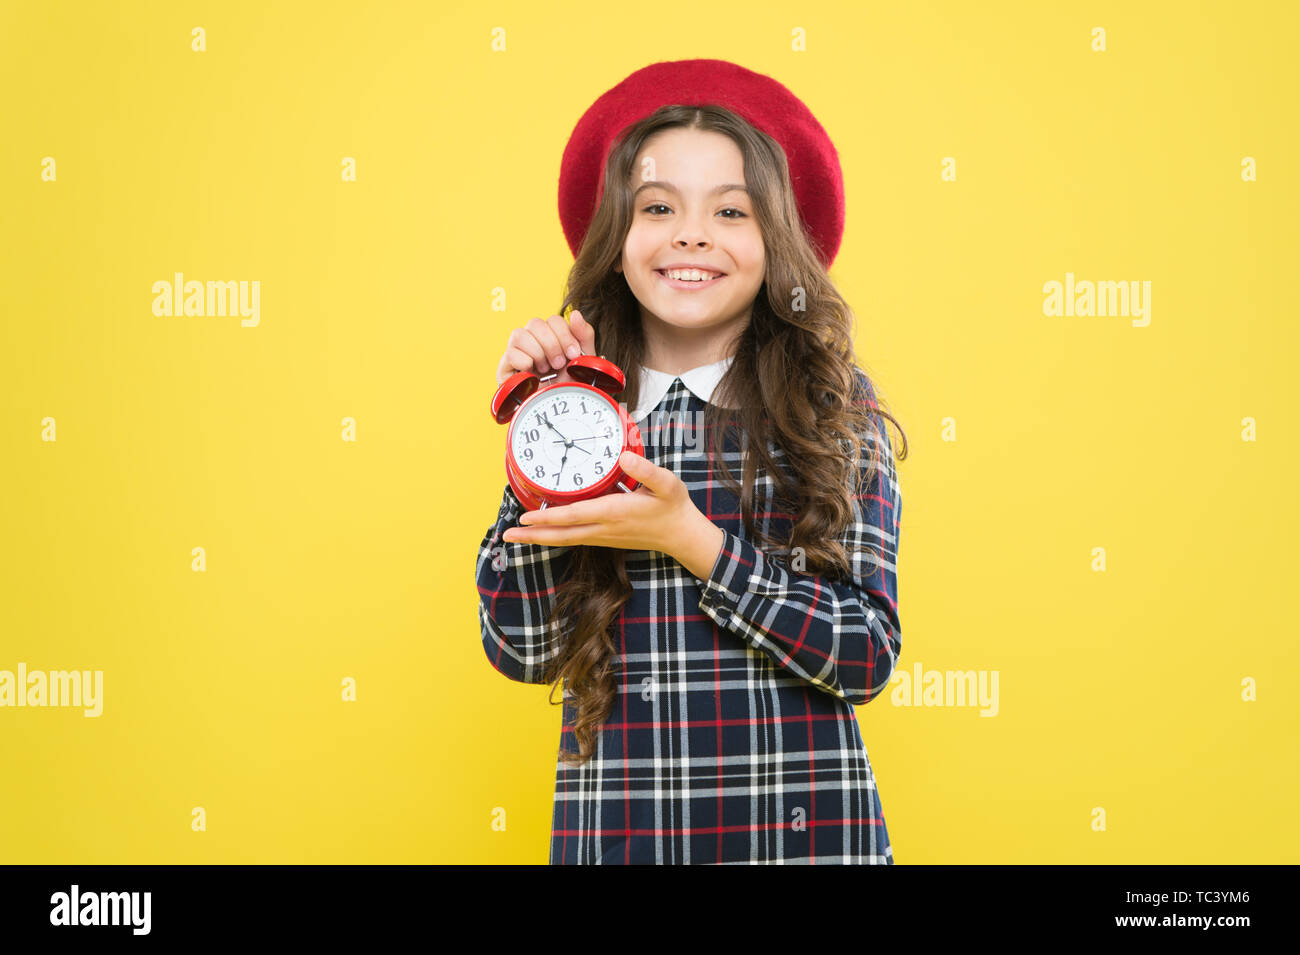 Timing is everything. Happy small child showing proper timing on yellow background. Little girl smiling and holding alarm clock with timing signal. Her timing is perfect. Stock Photo